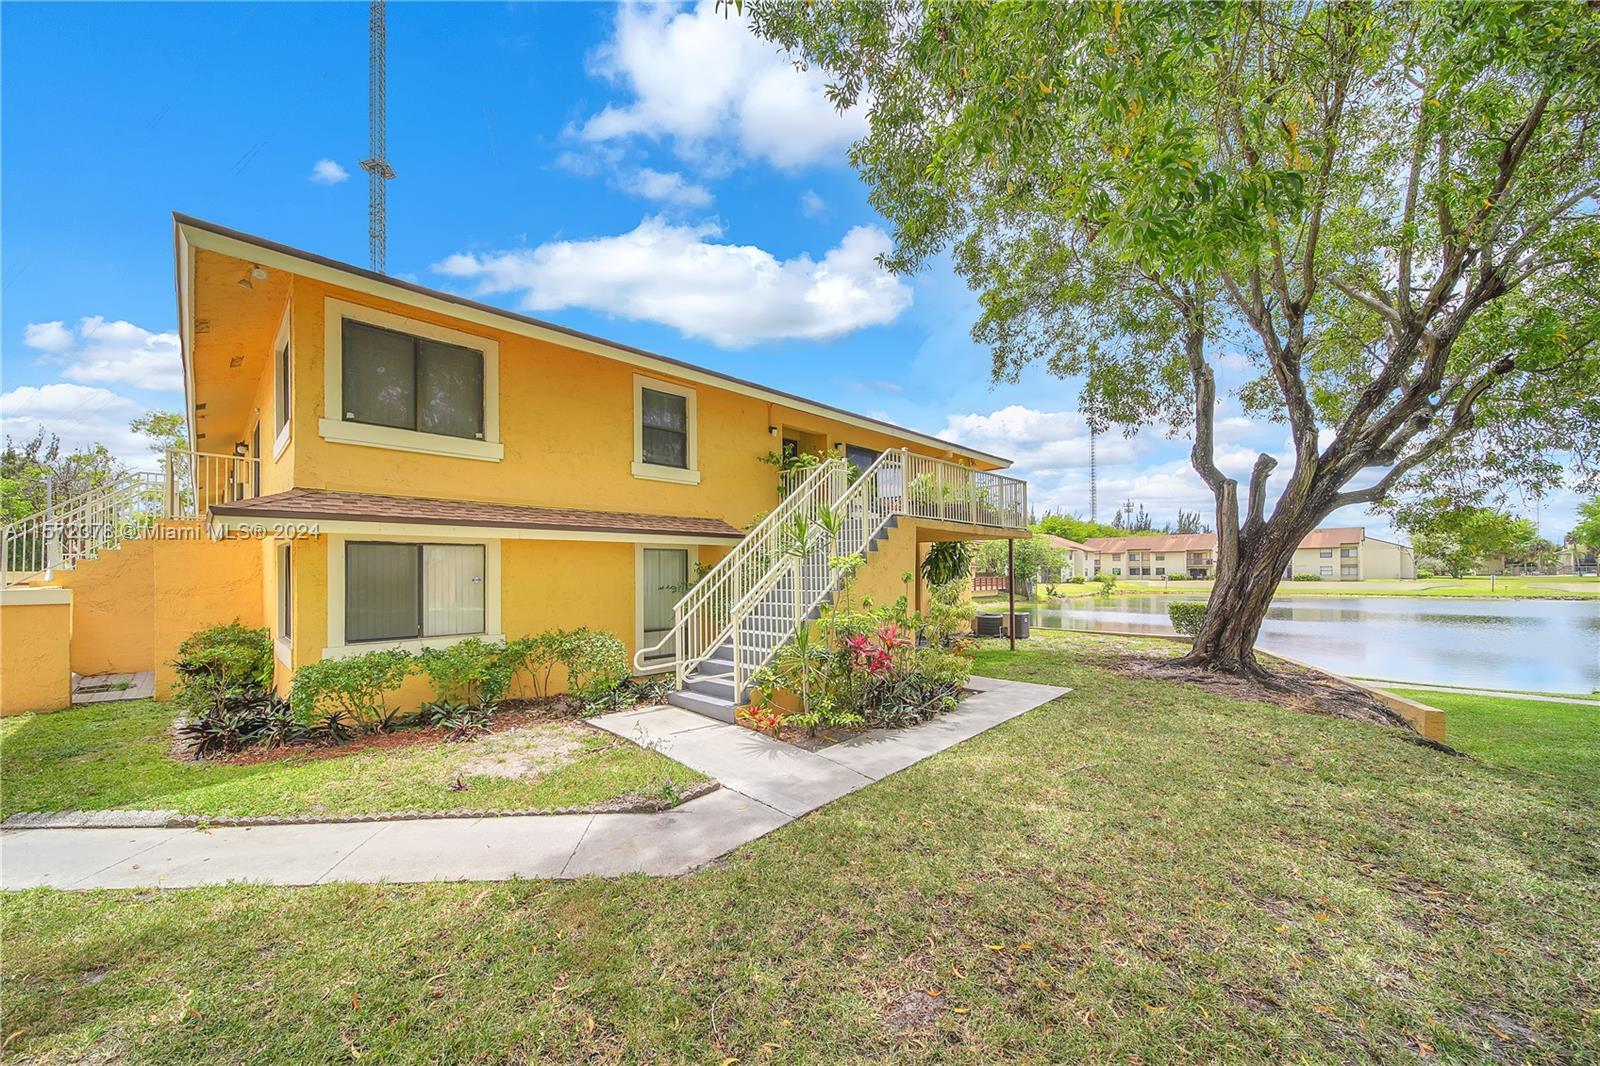 Photo of 410 NW 214th St #205 in Miami Gardens, FL